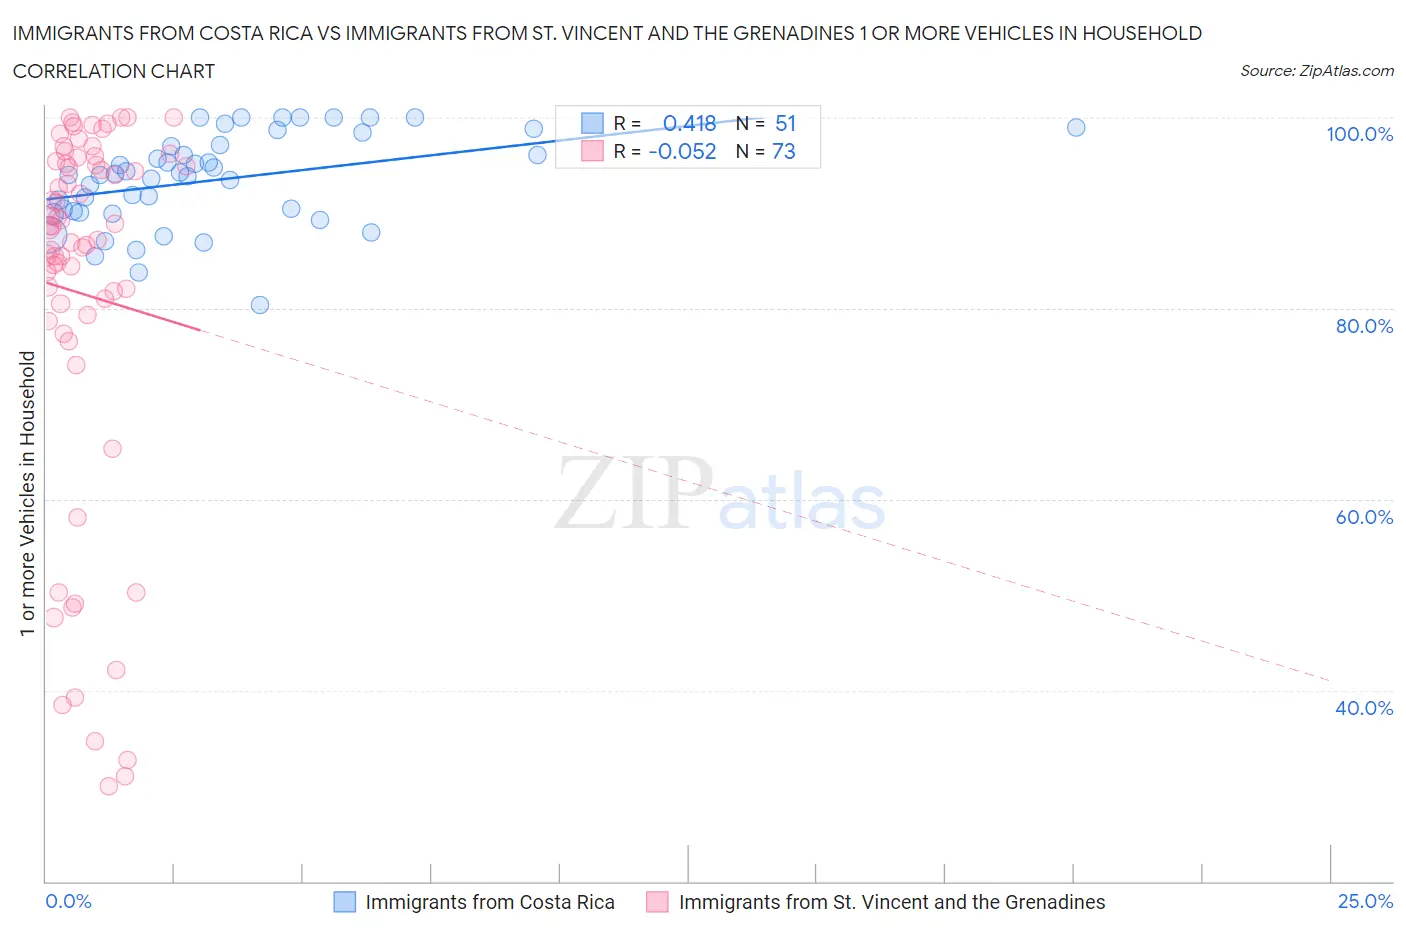 Immigrants from Costa Rica vs Immigrants from St. Vincent and the Grenadines 1 or more Vehicles in Household